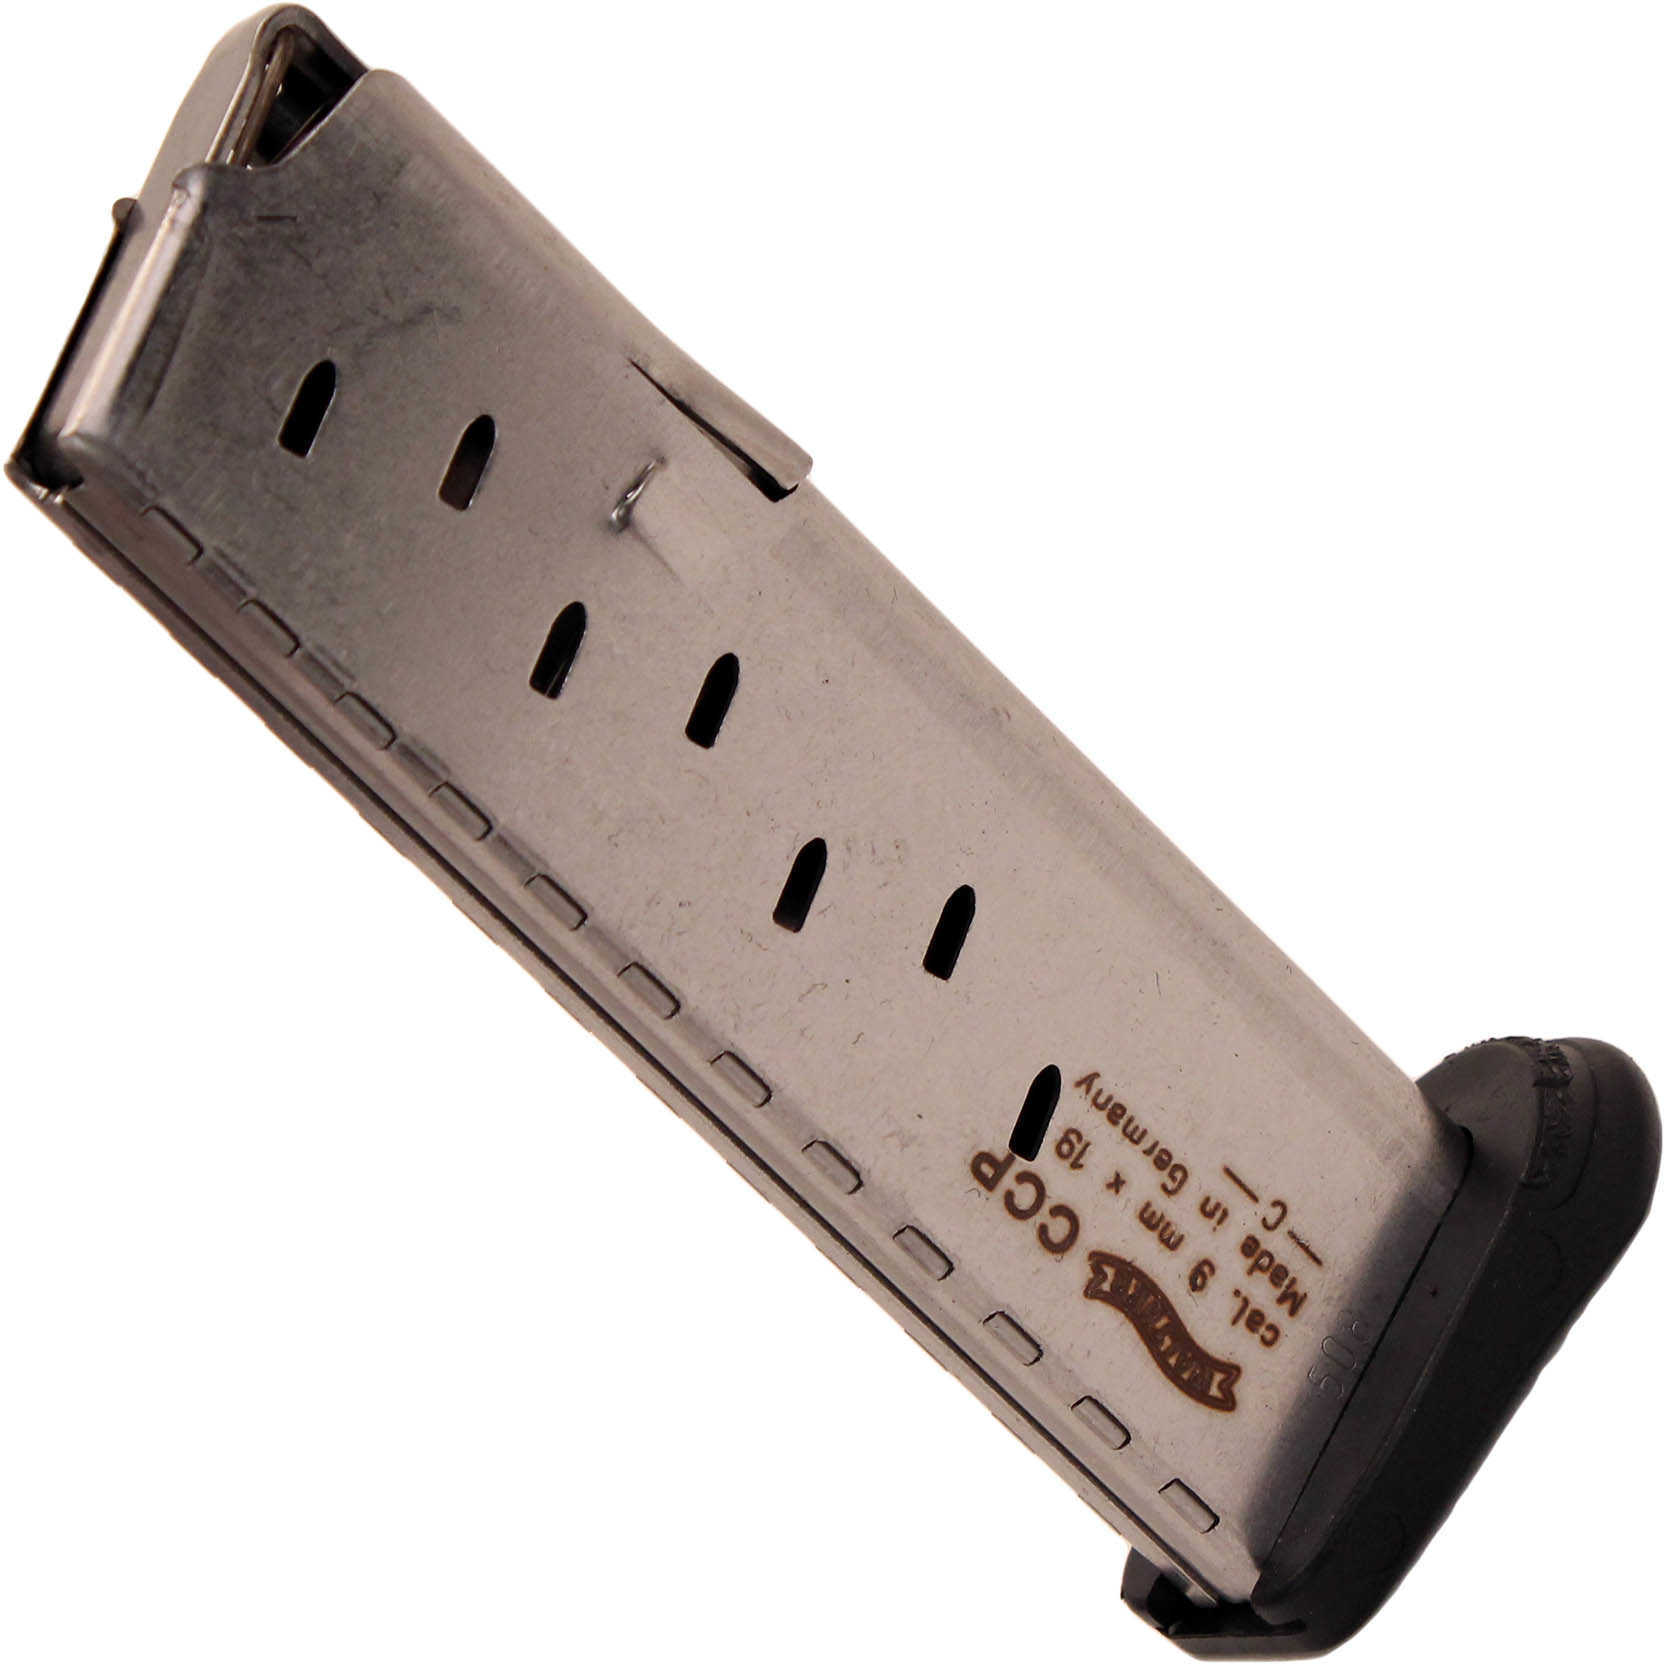 Walther CCP Magazine 9mm Stainless Steel 8/Rd